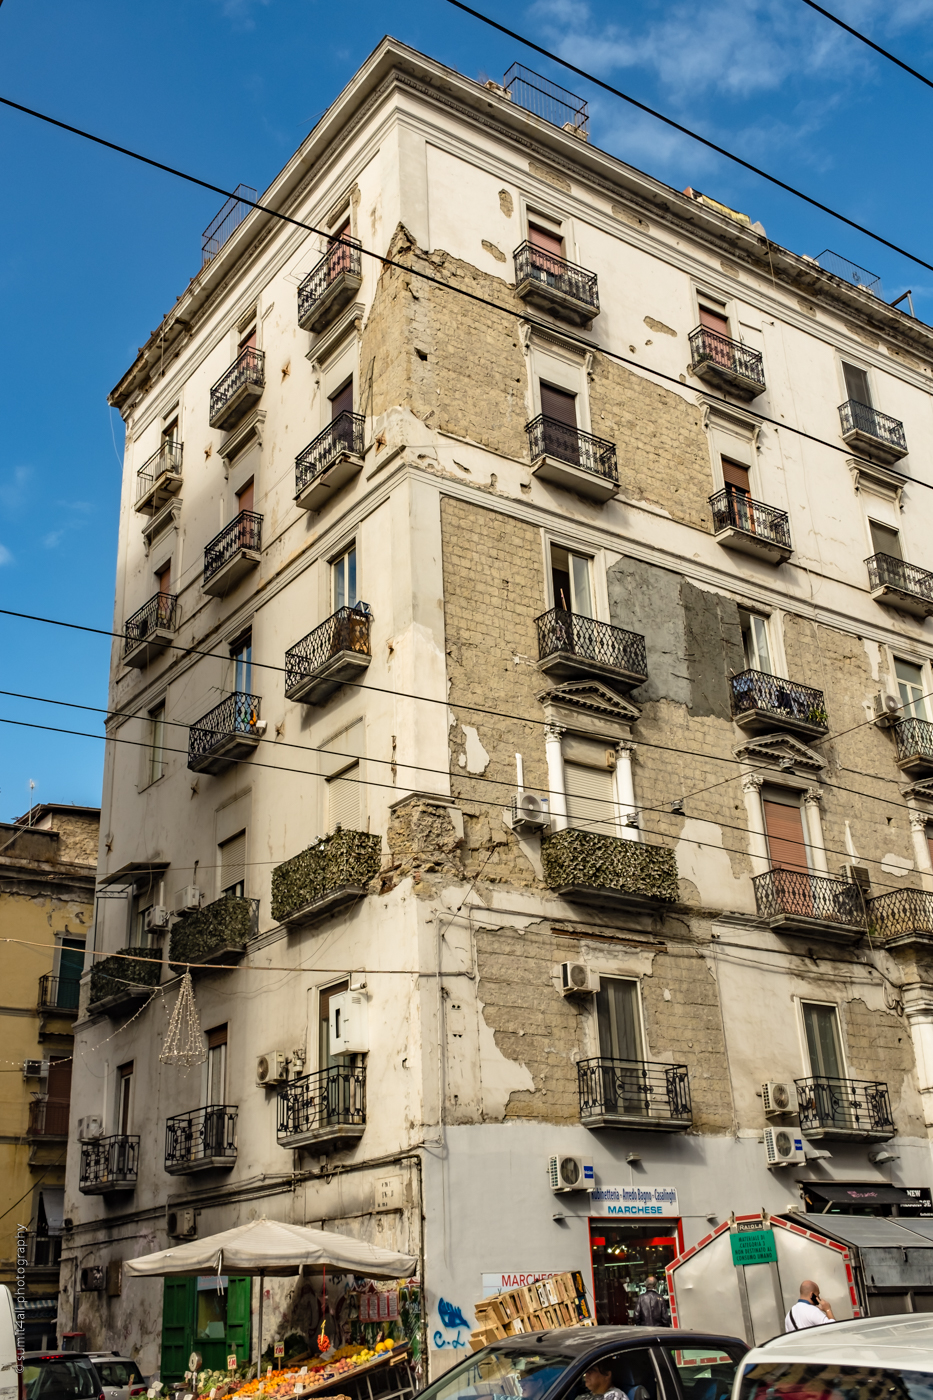 Beauty in Imperfection in a City - Naples, Italy